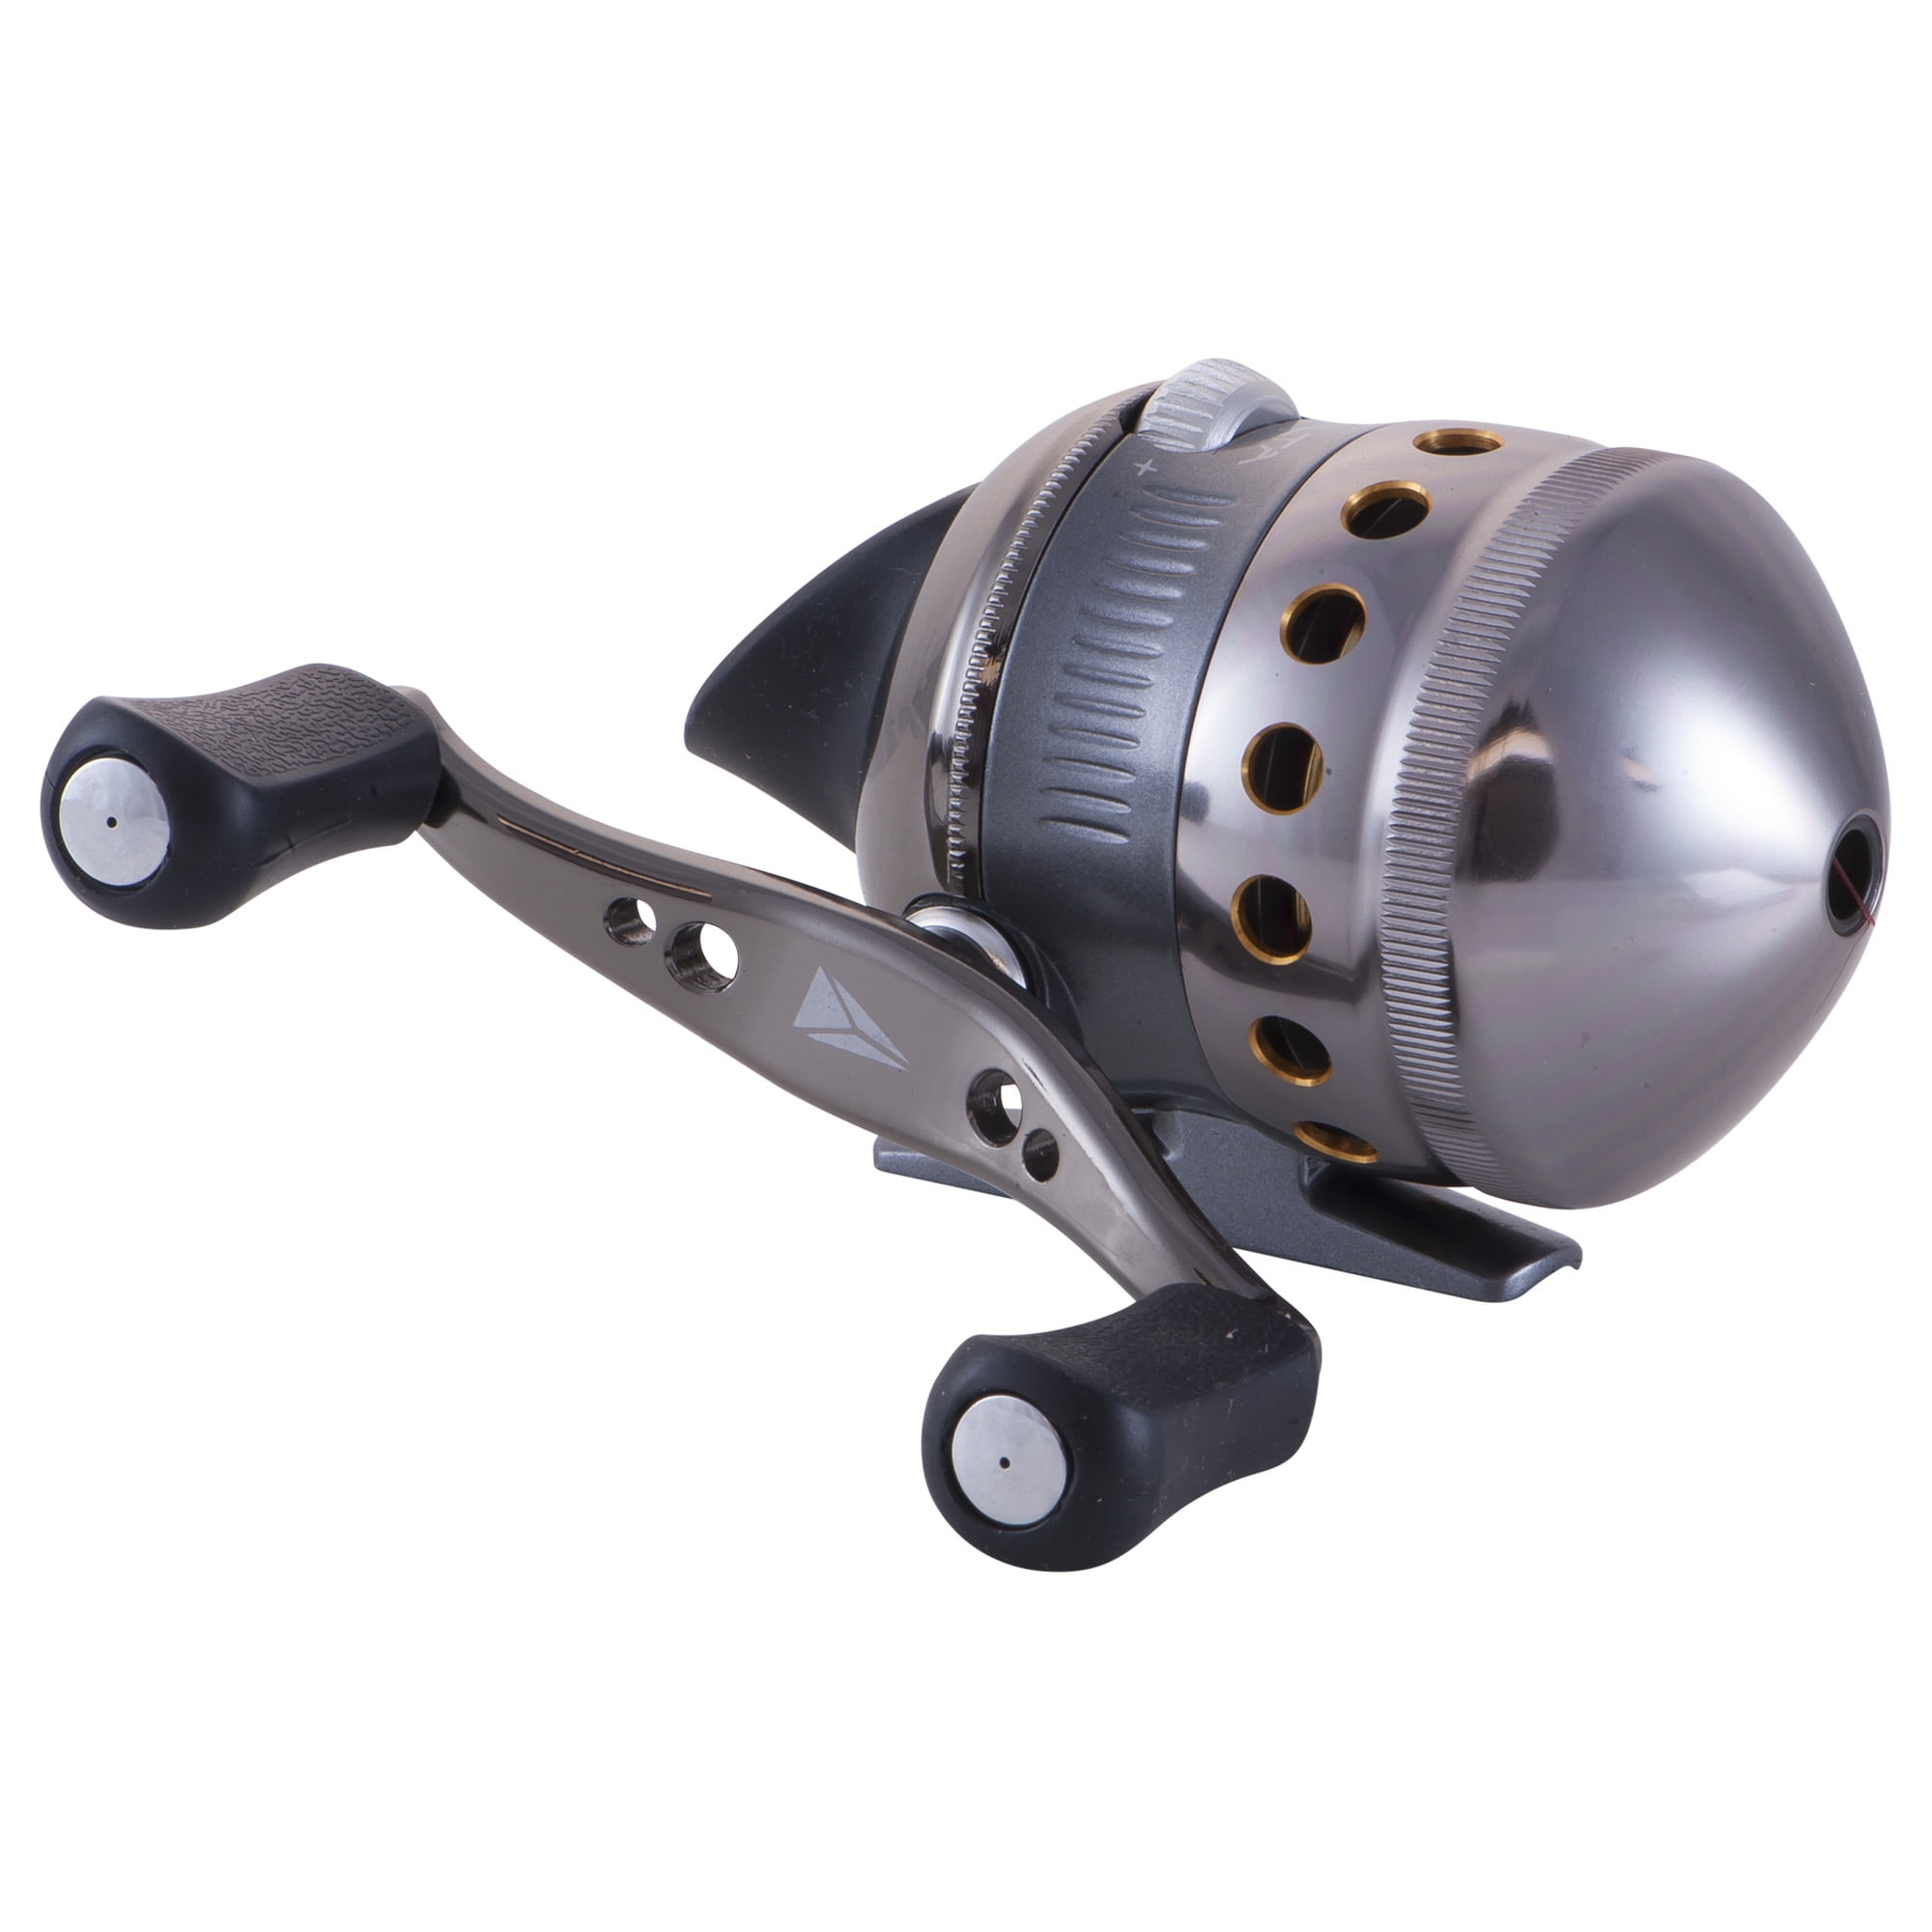 Aluminum Delta Zebco Silver Spincast 10-Pound with Pre-Spooled Size Changeable Fishing and Fishing Right- Front Reel, Reel, Zebco Line, Double Cover, or Anodized Retrieve, Left-Hand 30